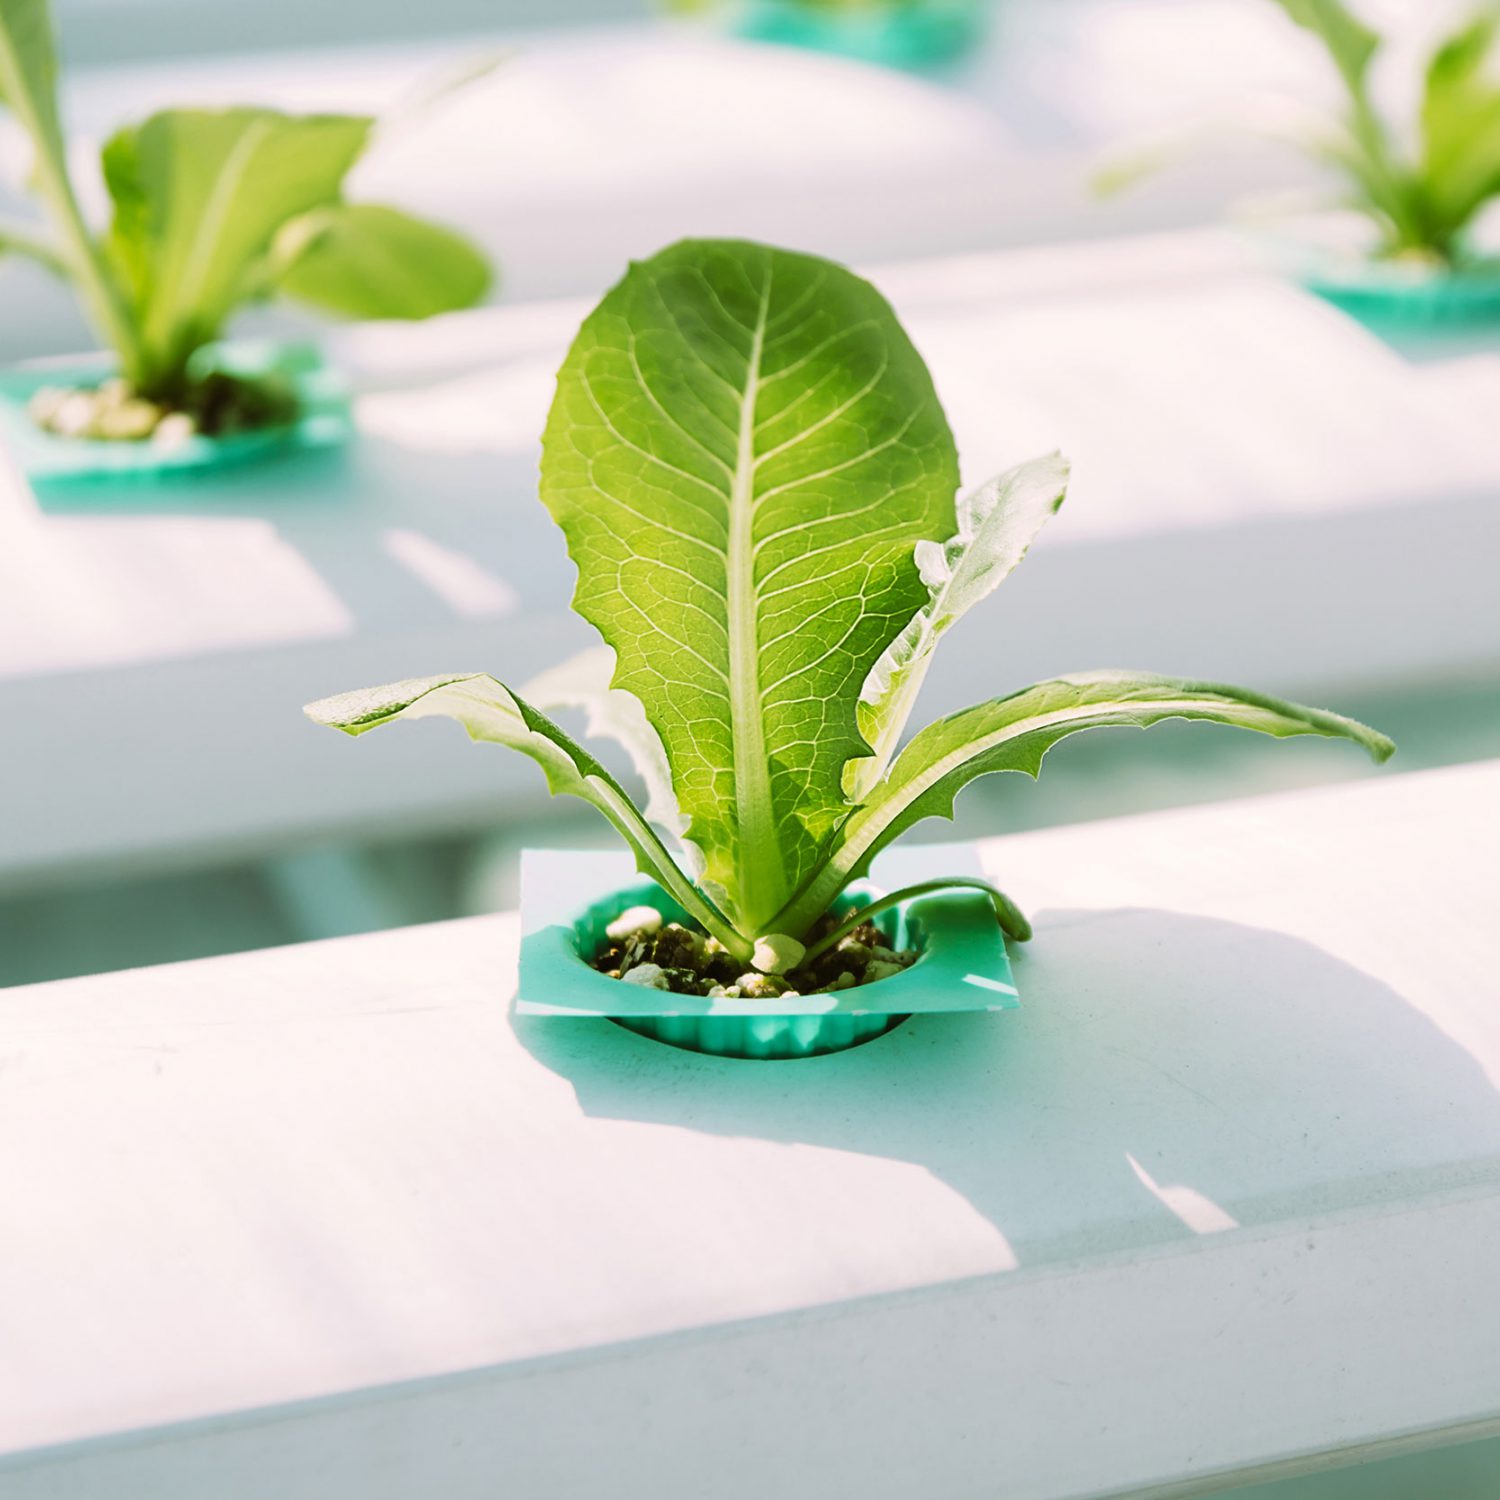 Image of lettuce growing